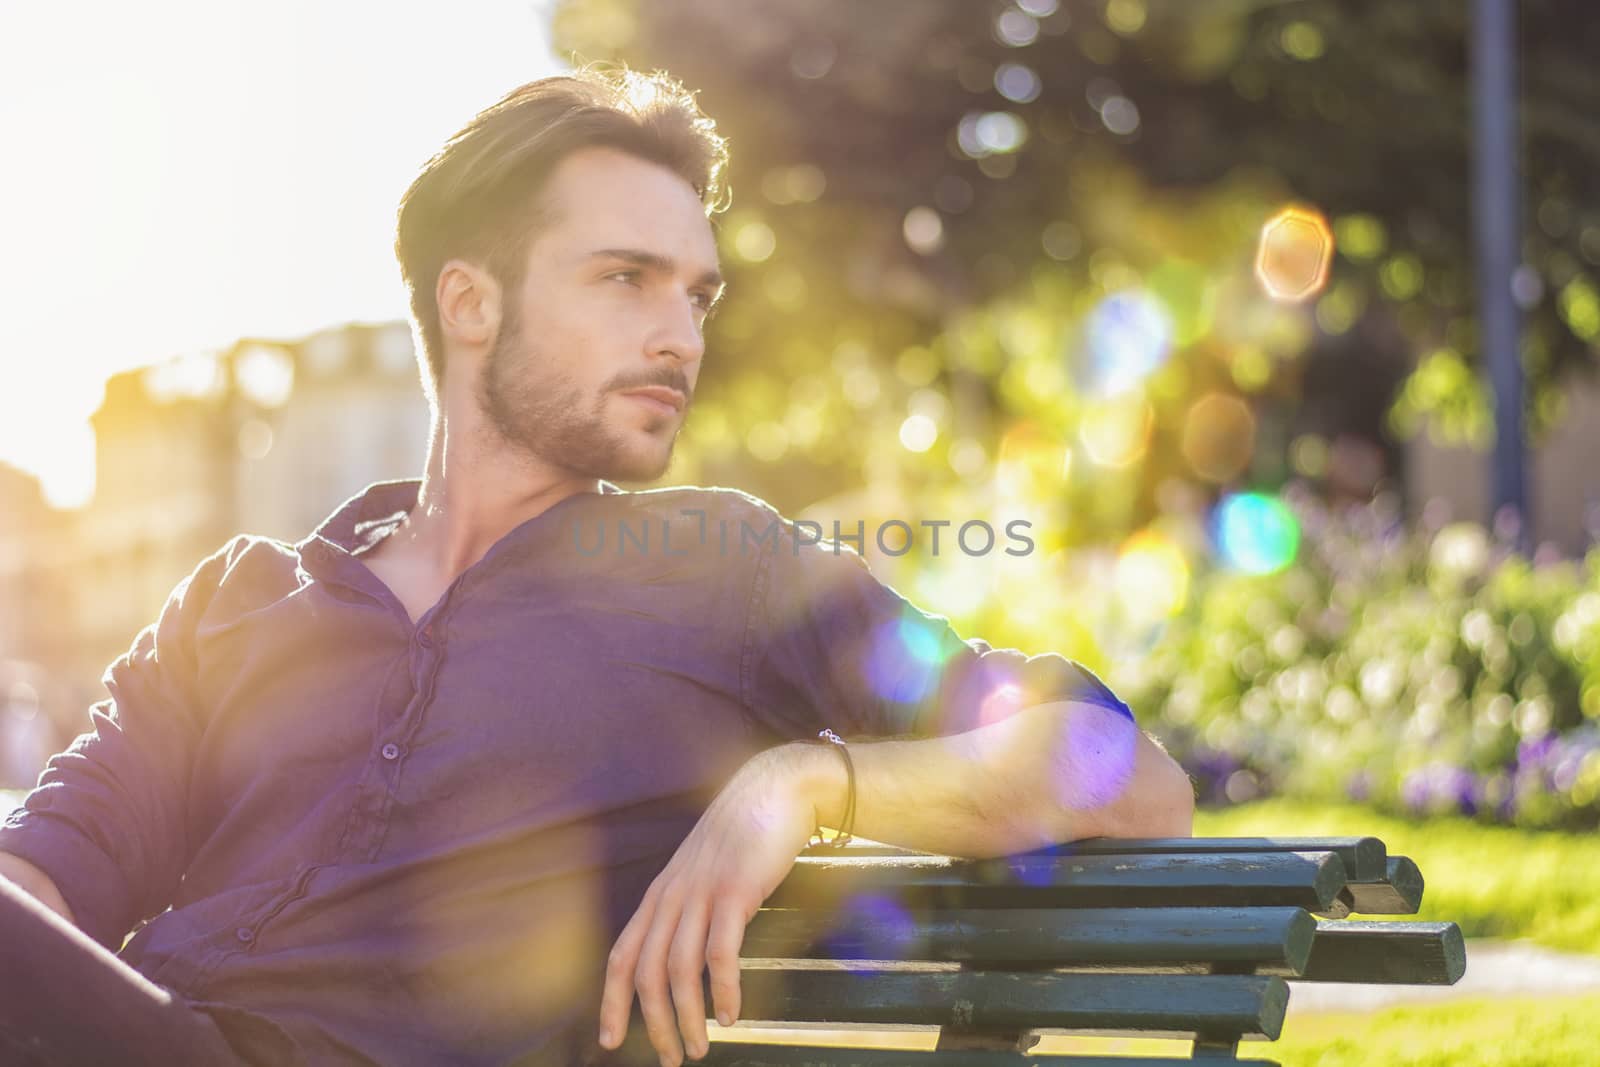 One handsome young man in urban setting in European city, a city park